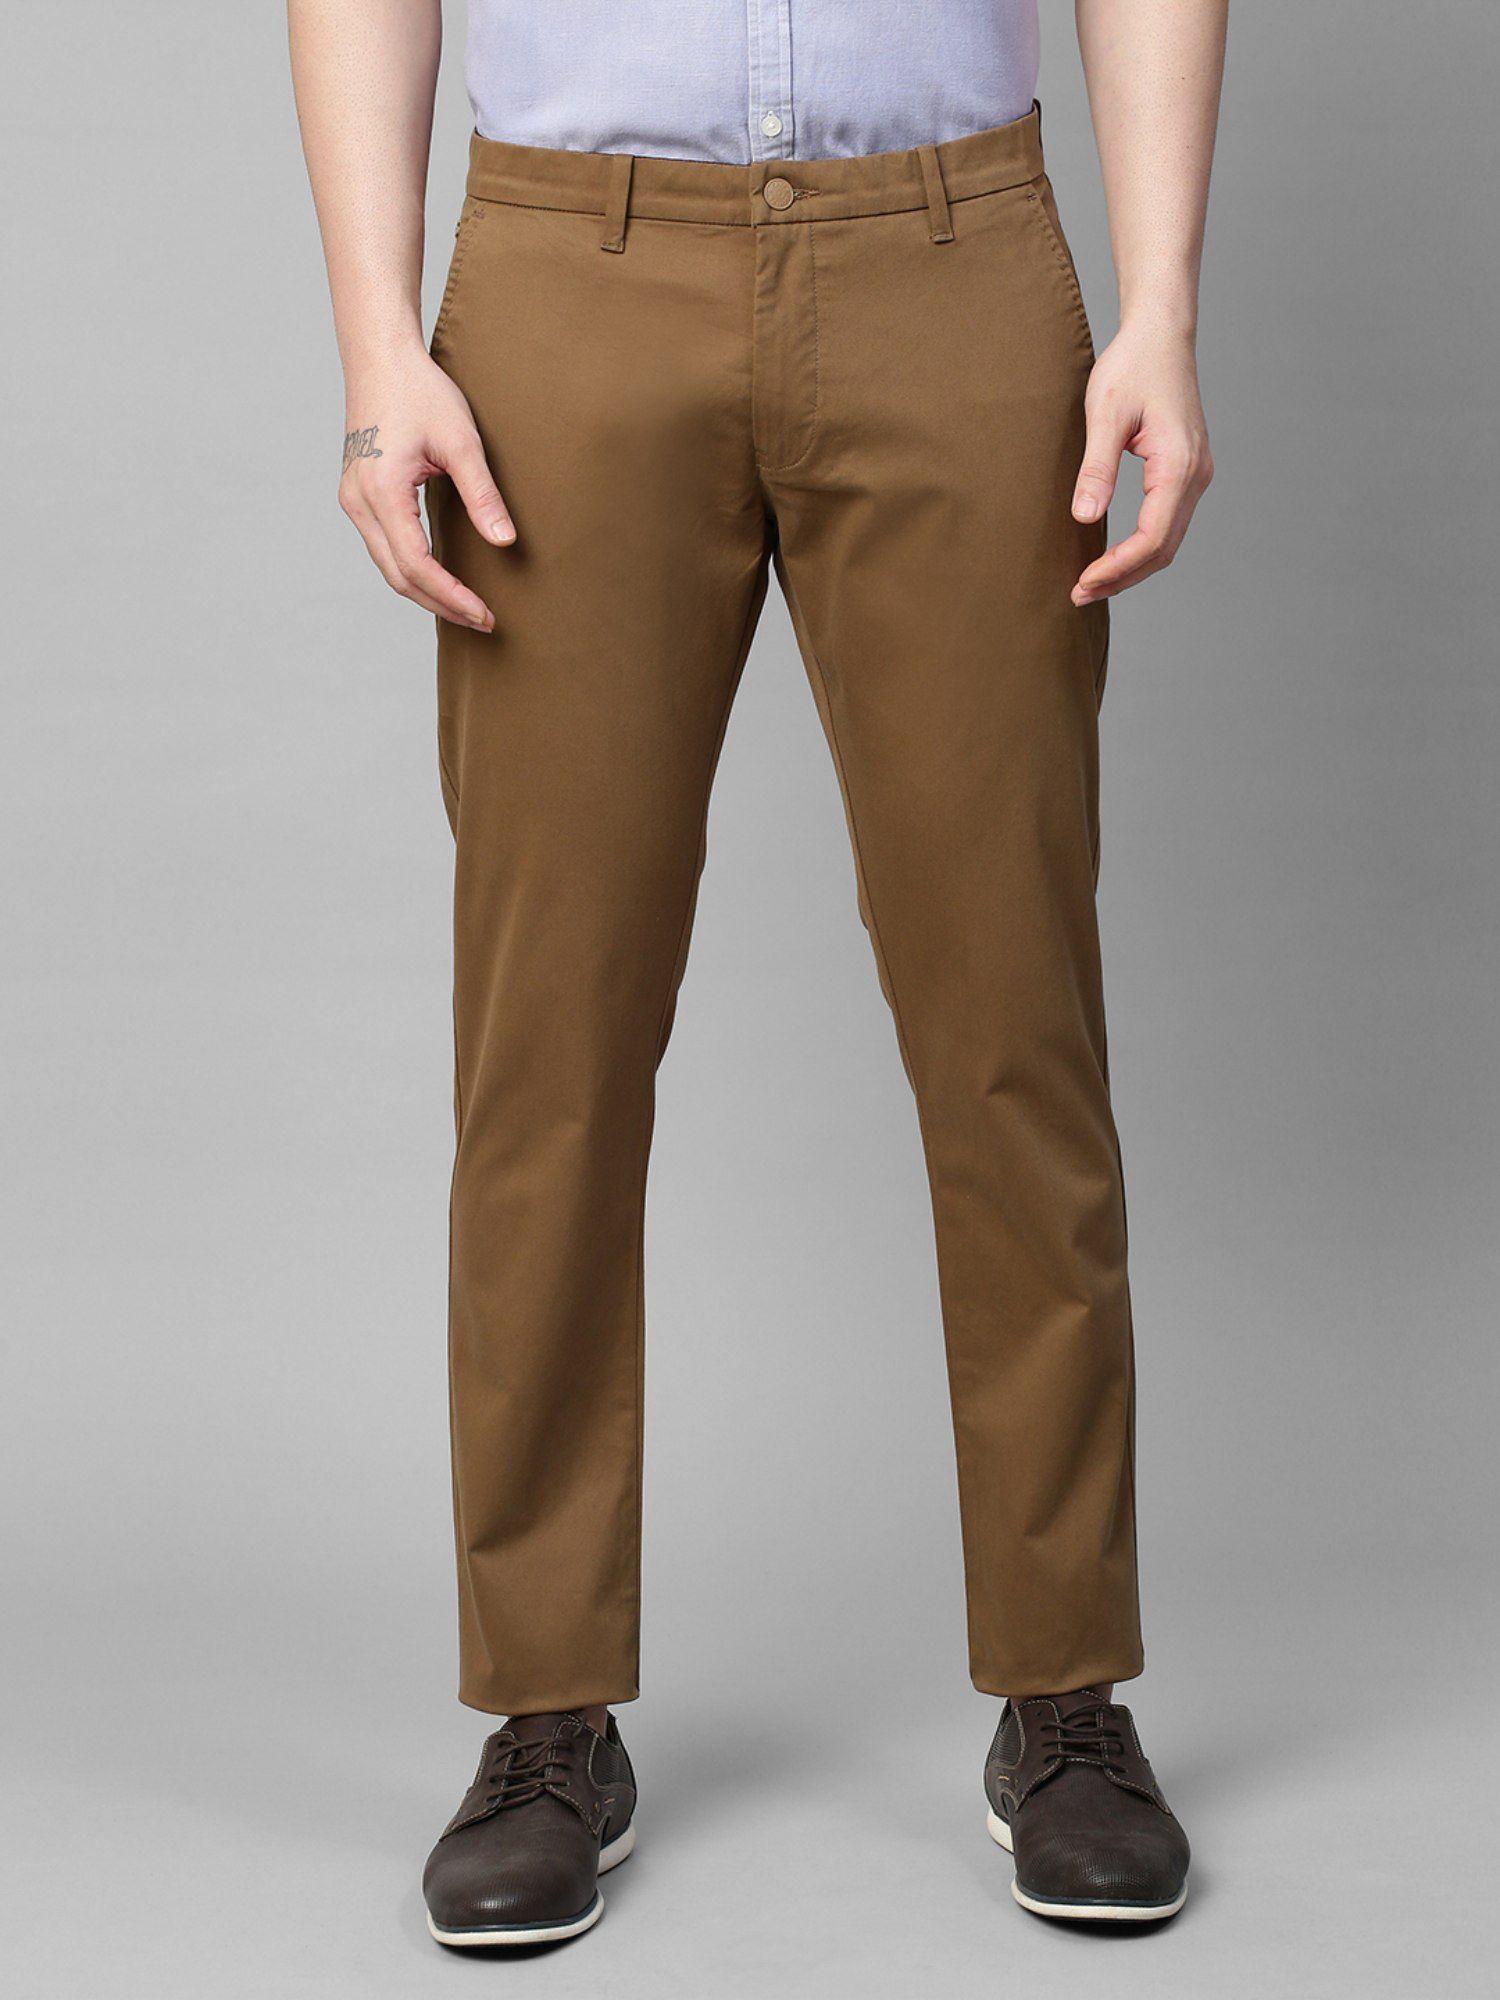 men's brown cotton stretch caribbean slim fit solid trousers